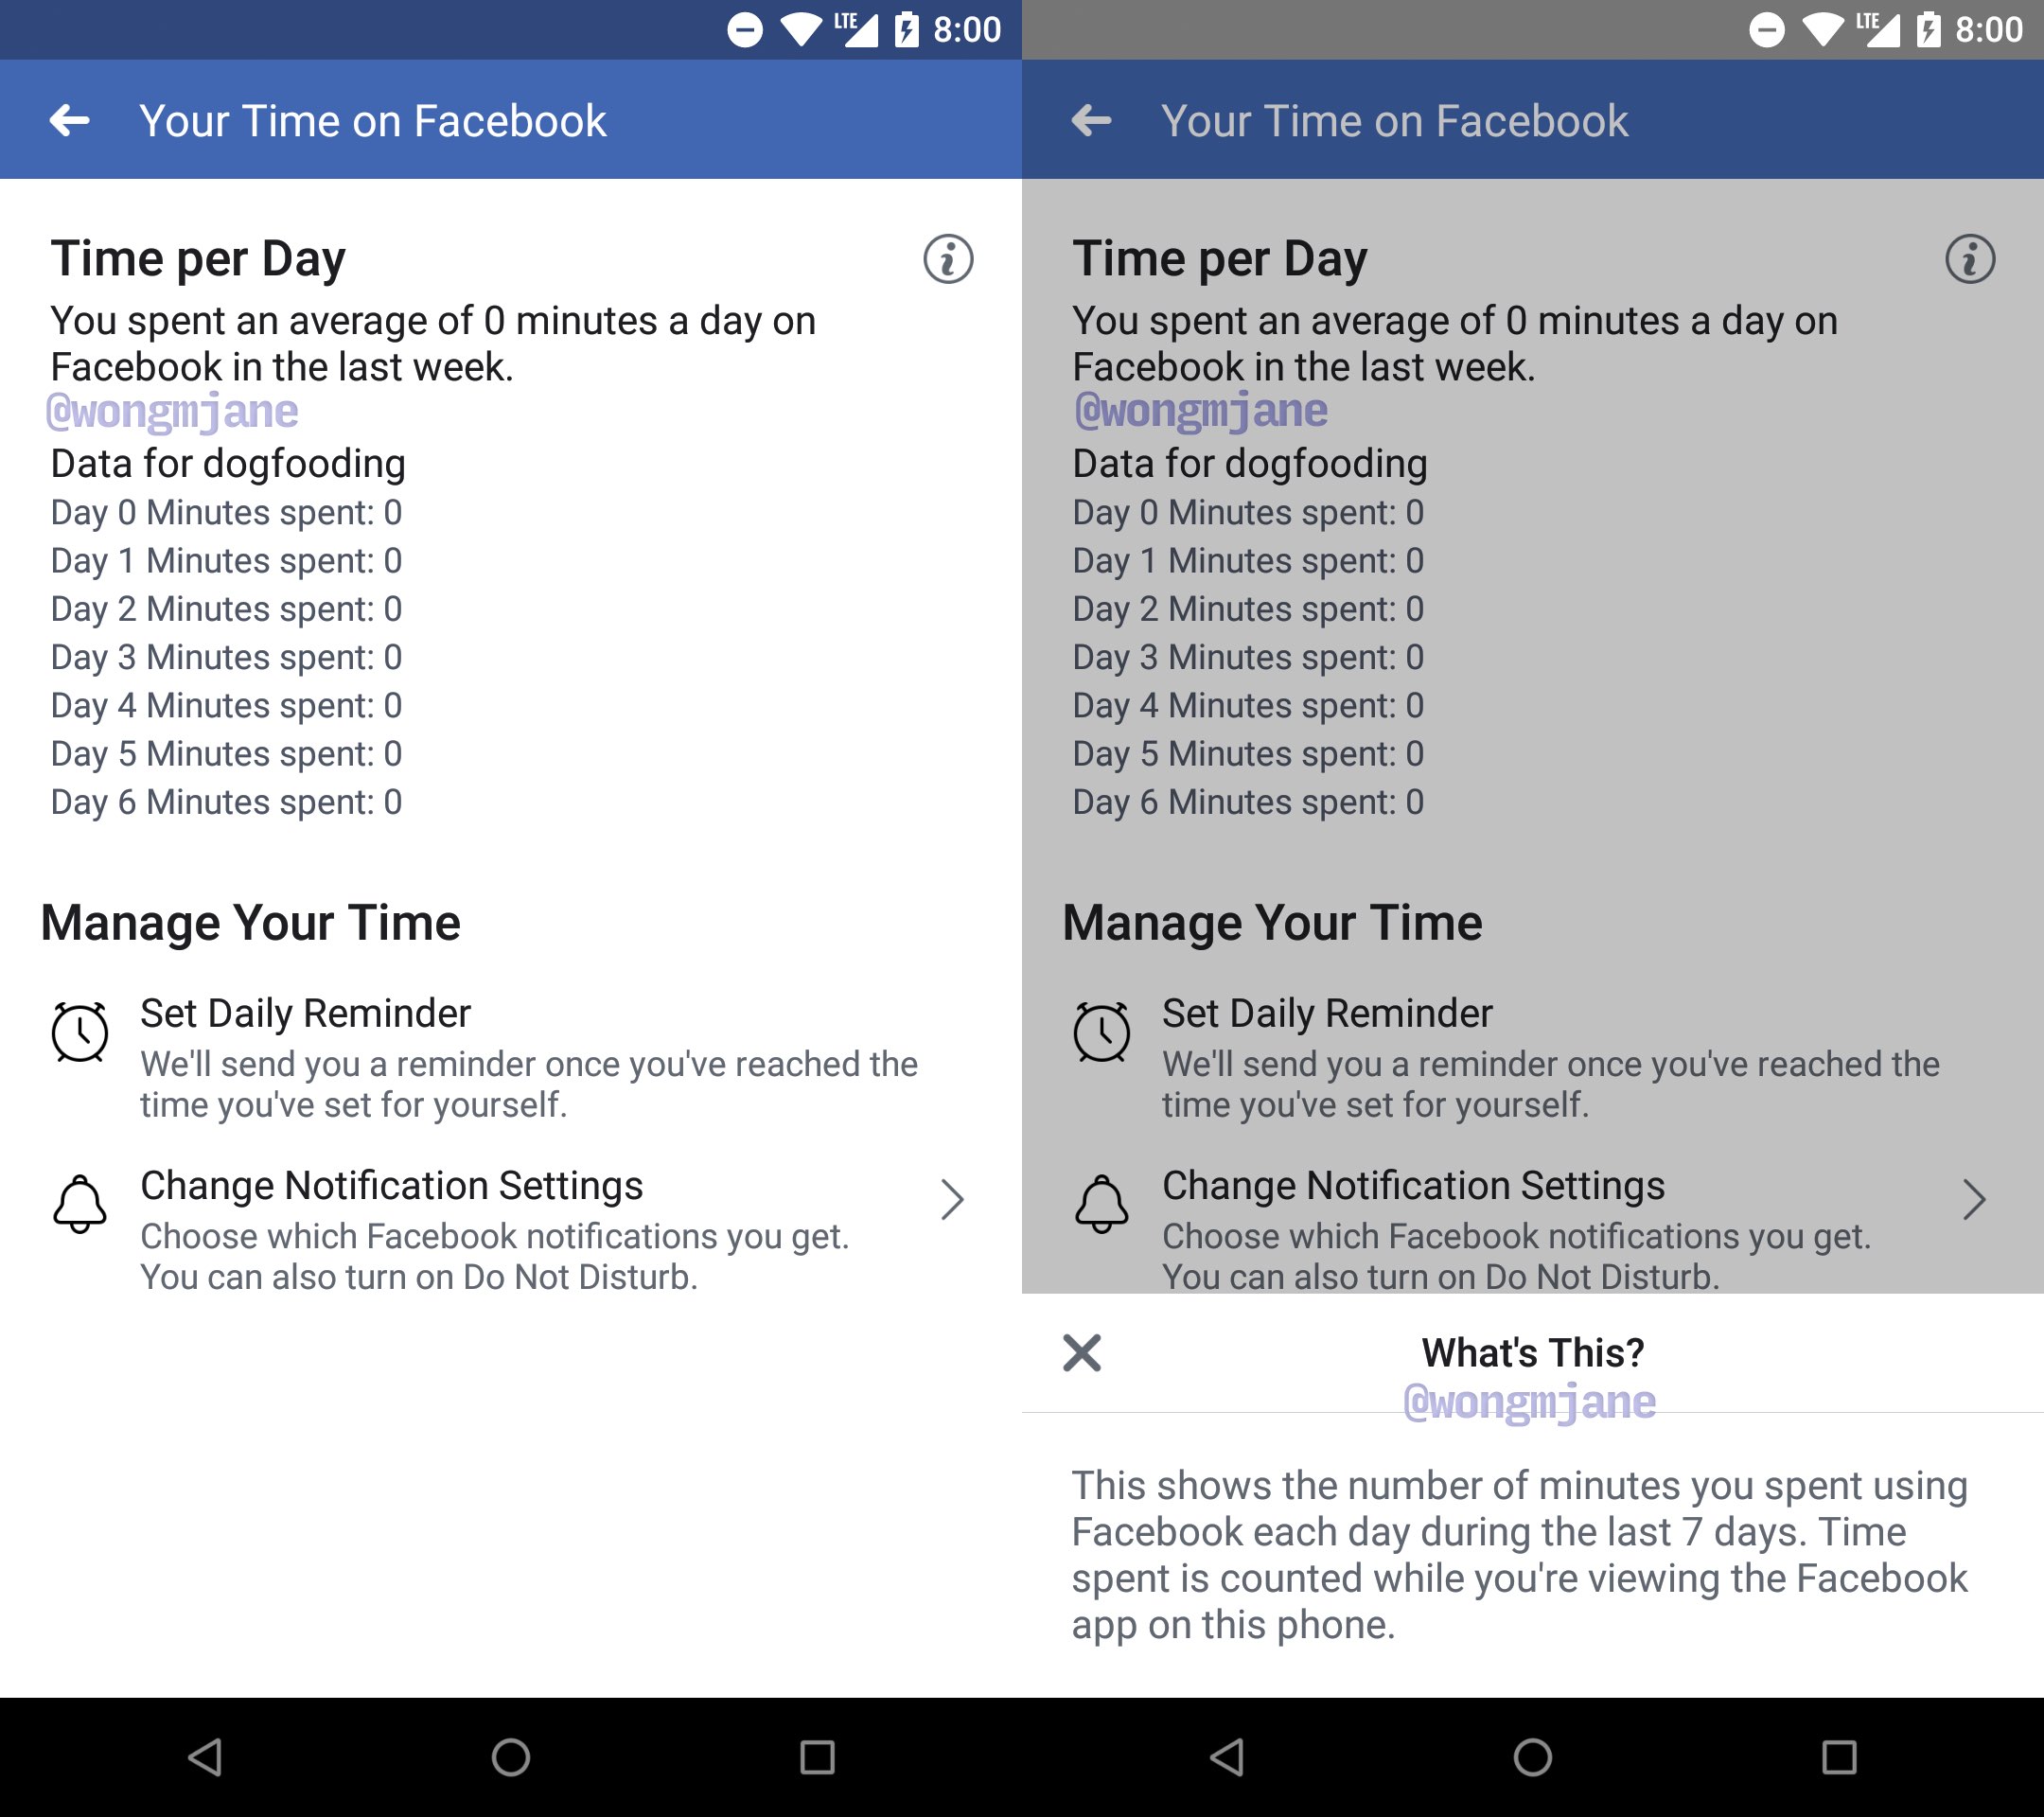 The unreleased “Your Time on Facebook” feature was discovered by digging through the code of Facebook for Android 